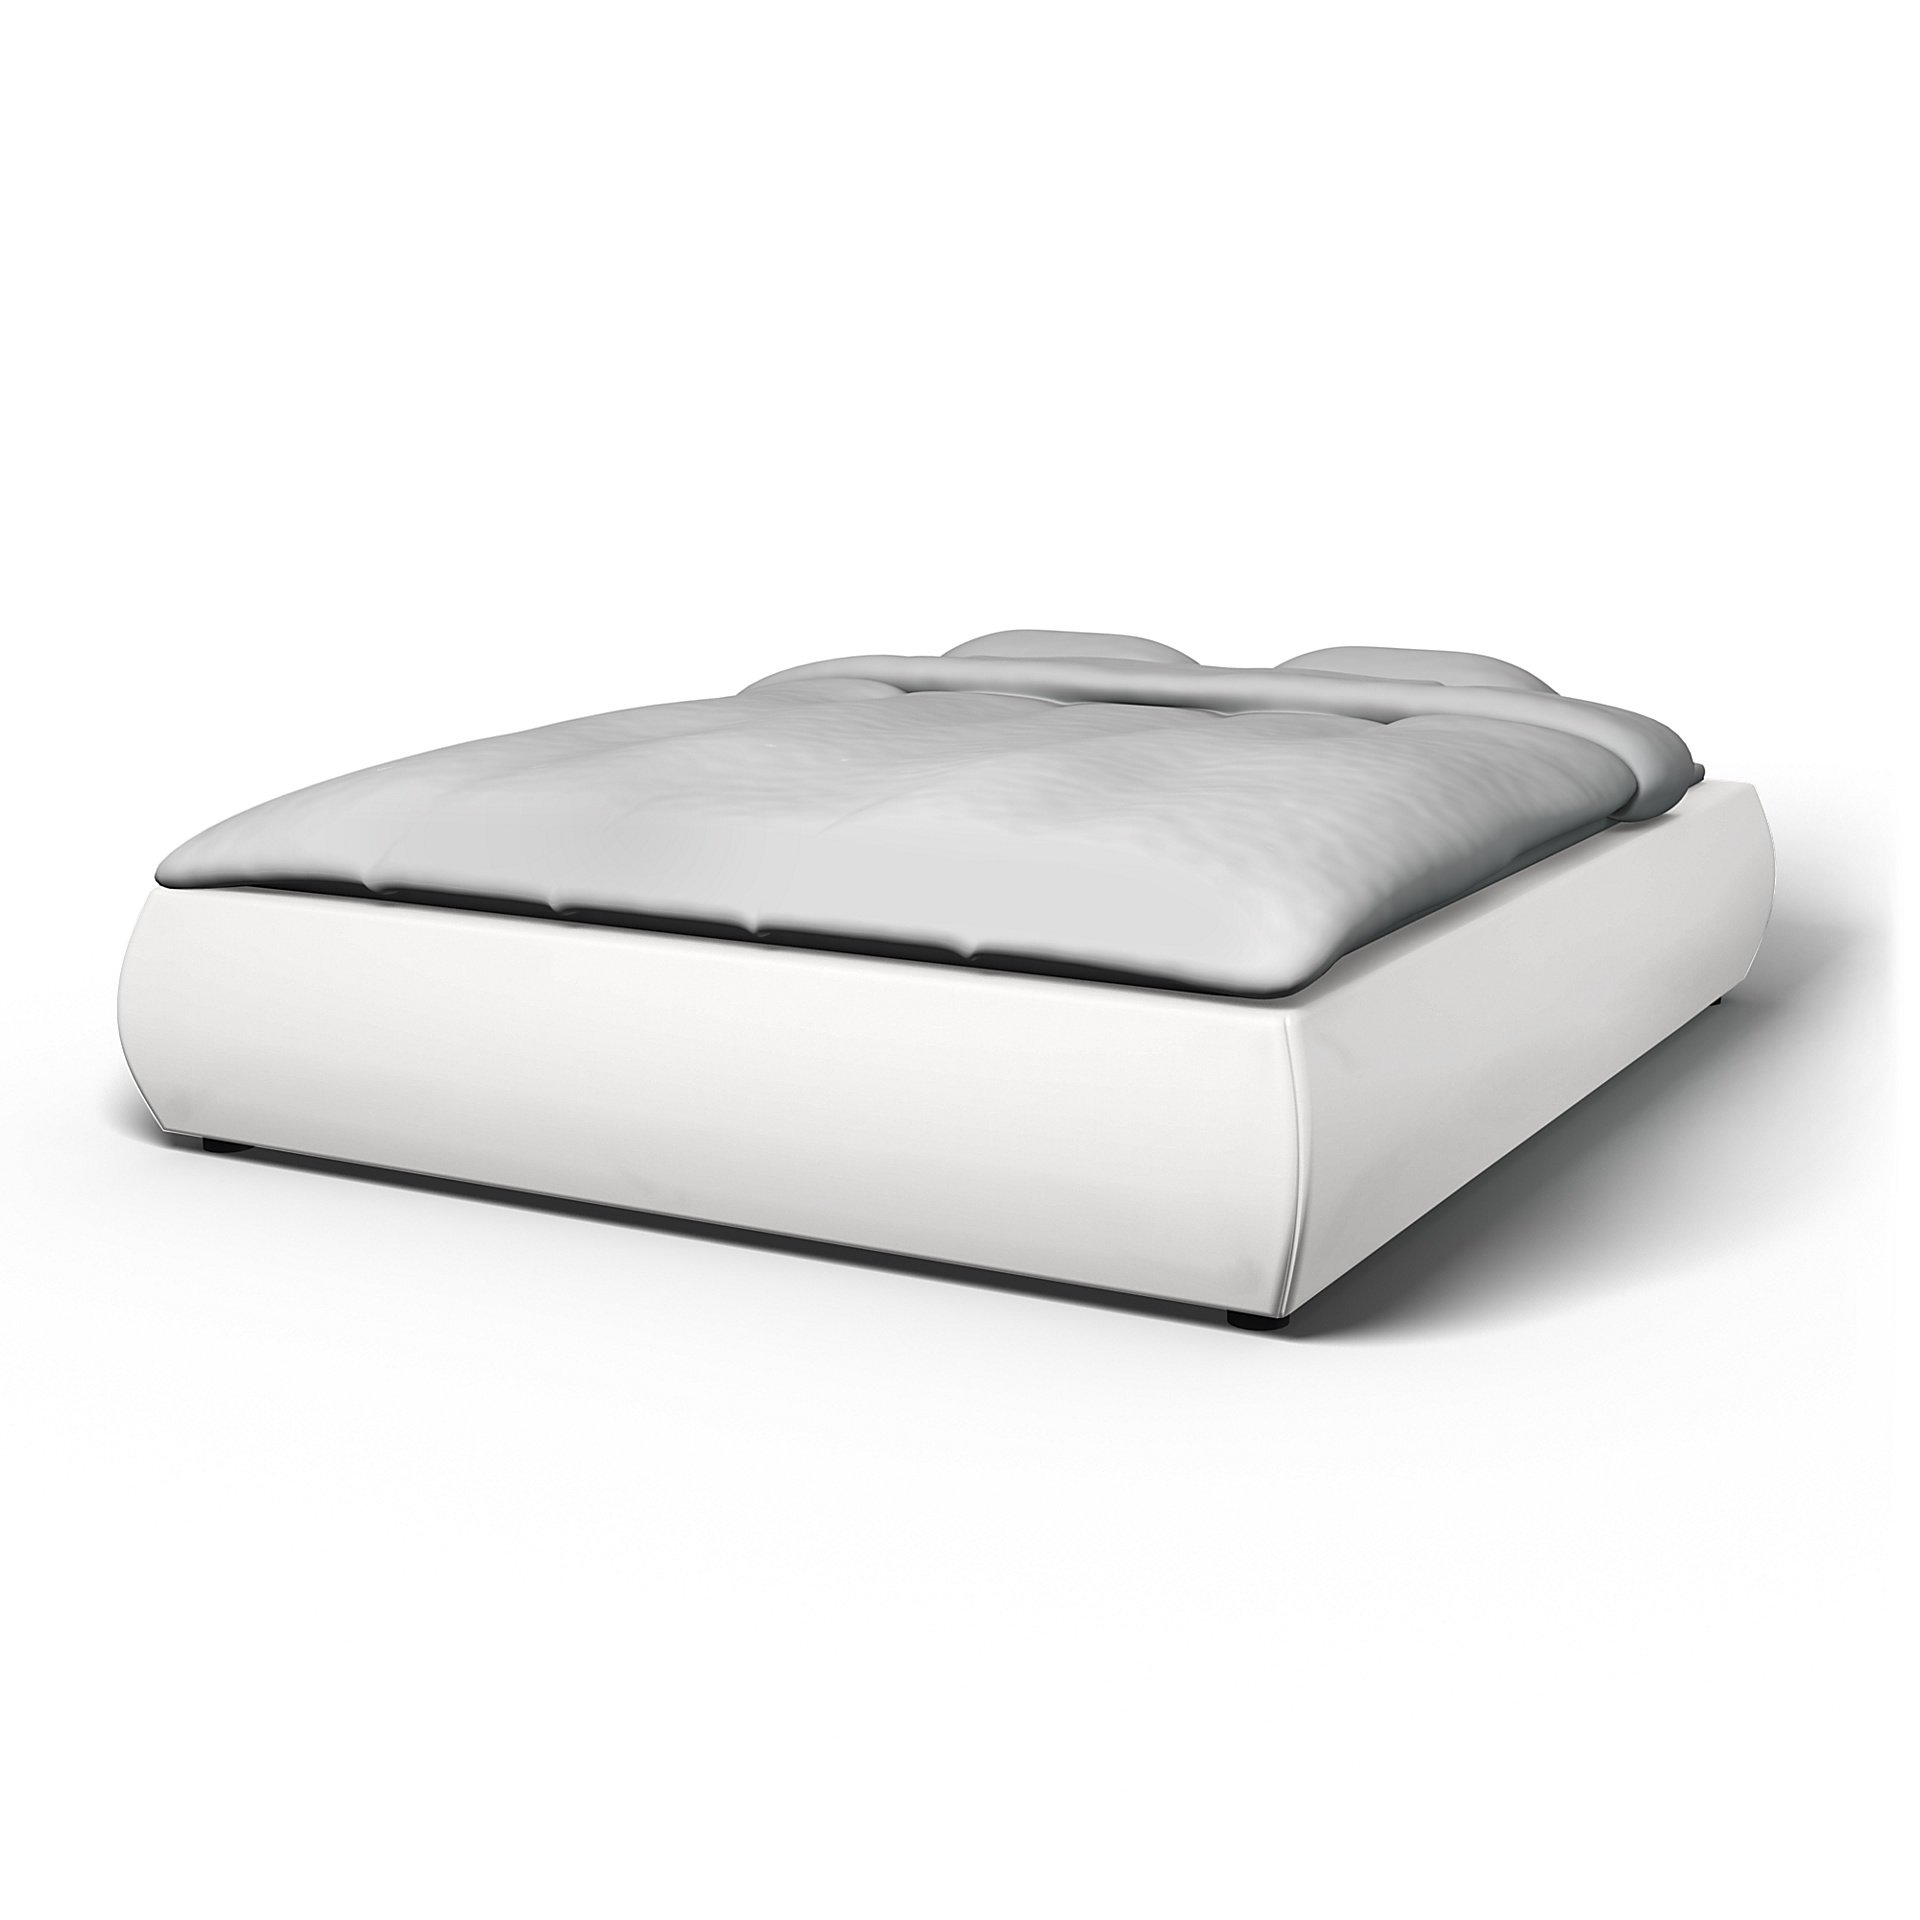 IKEA - Grimen Bed Frame Cover, Absolute White, Cotton - Bemz